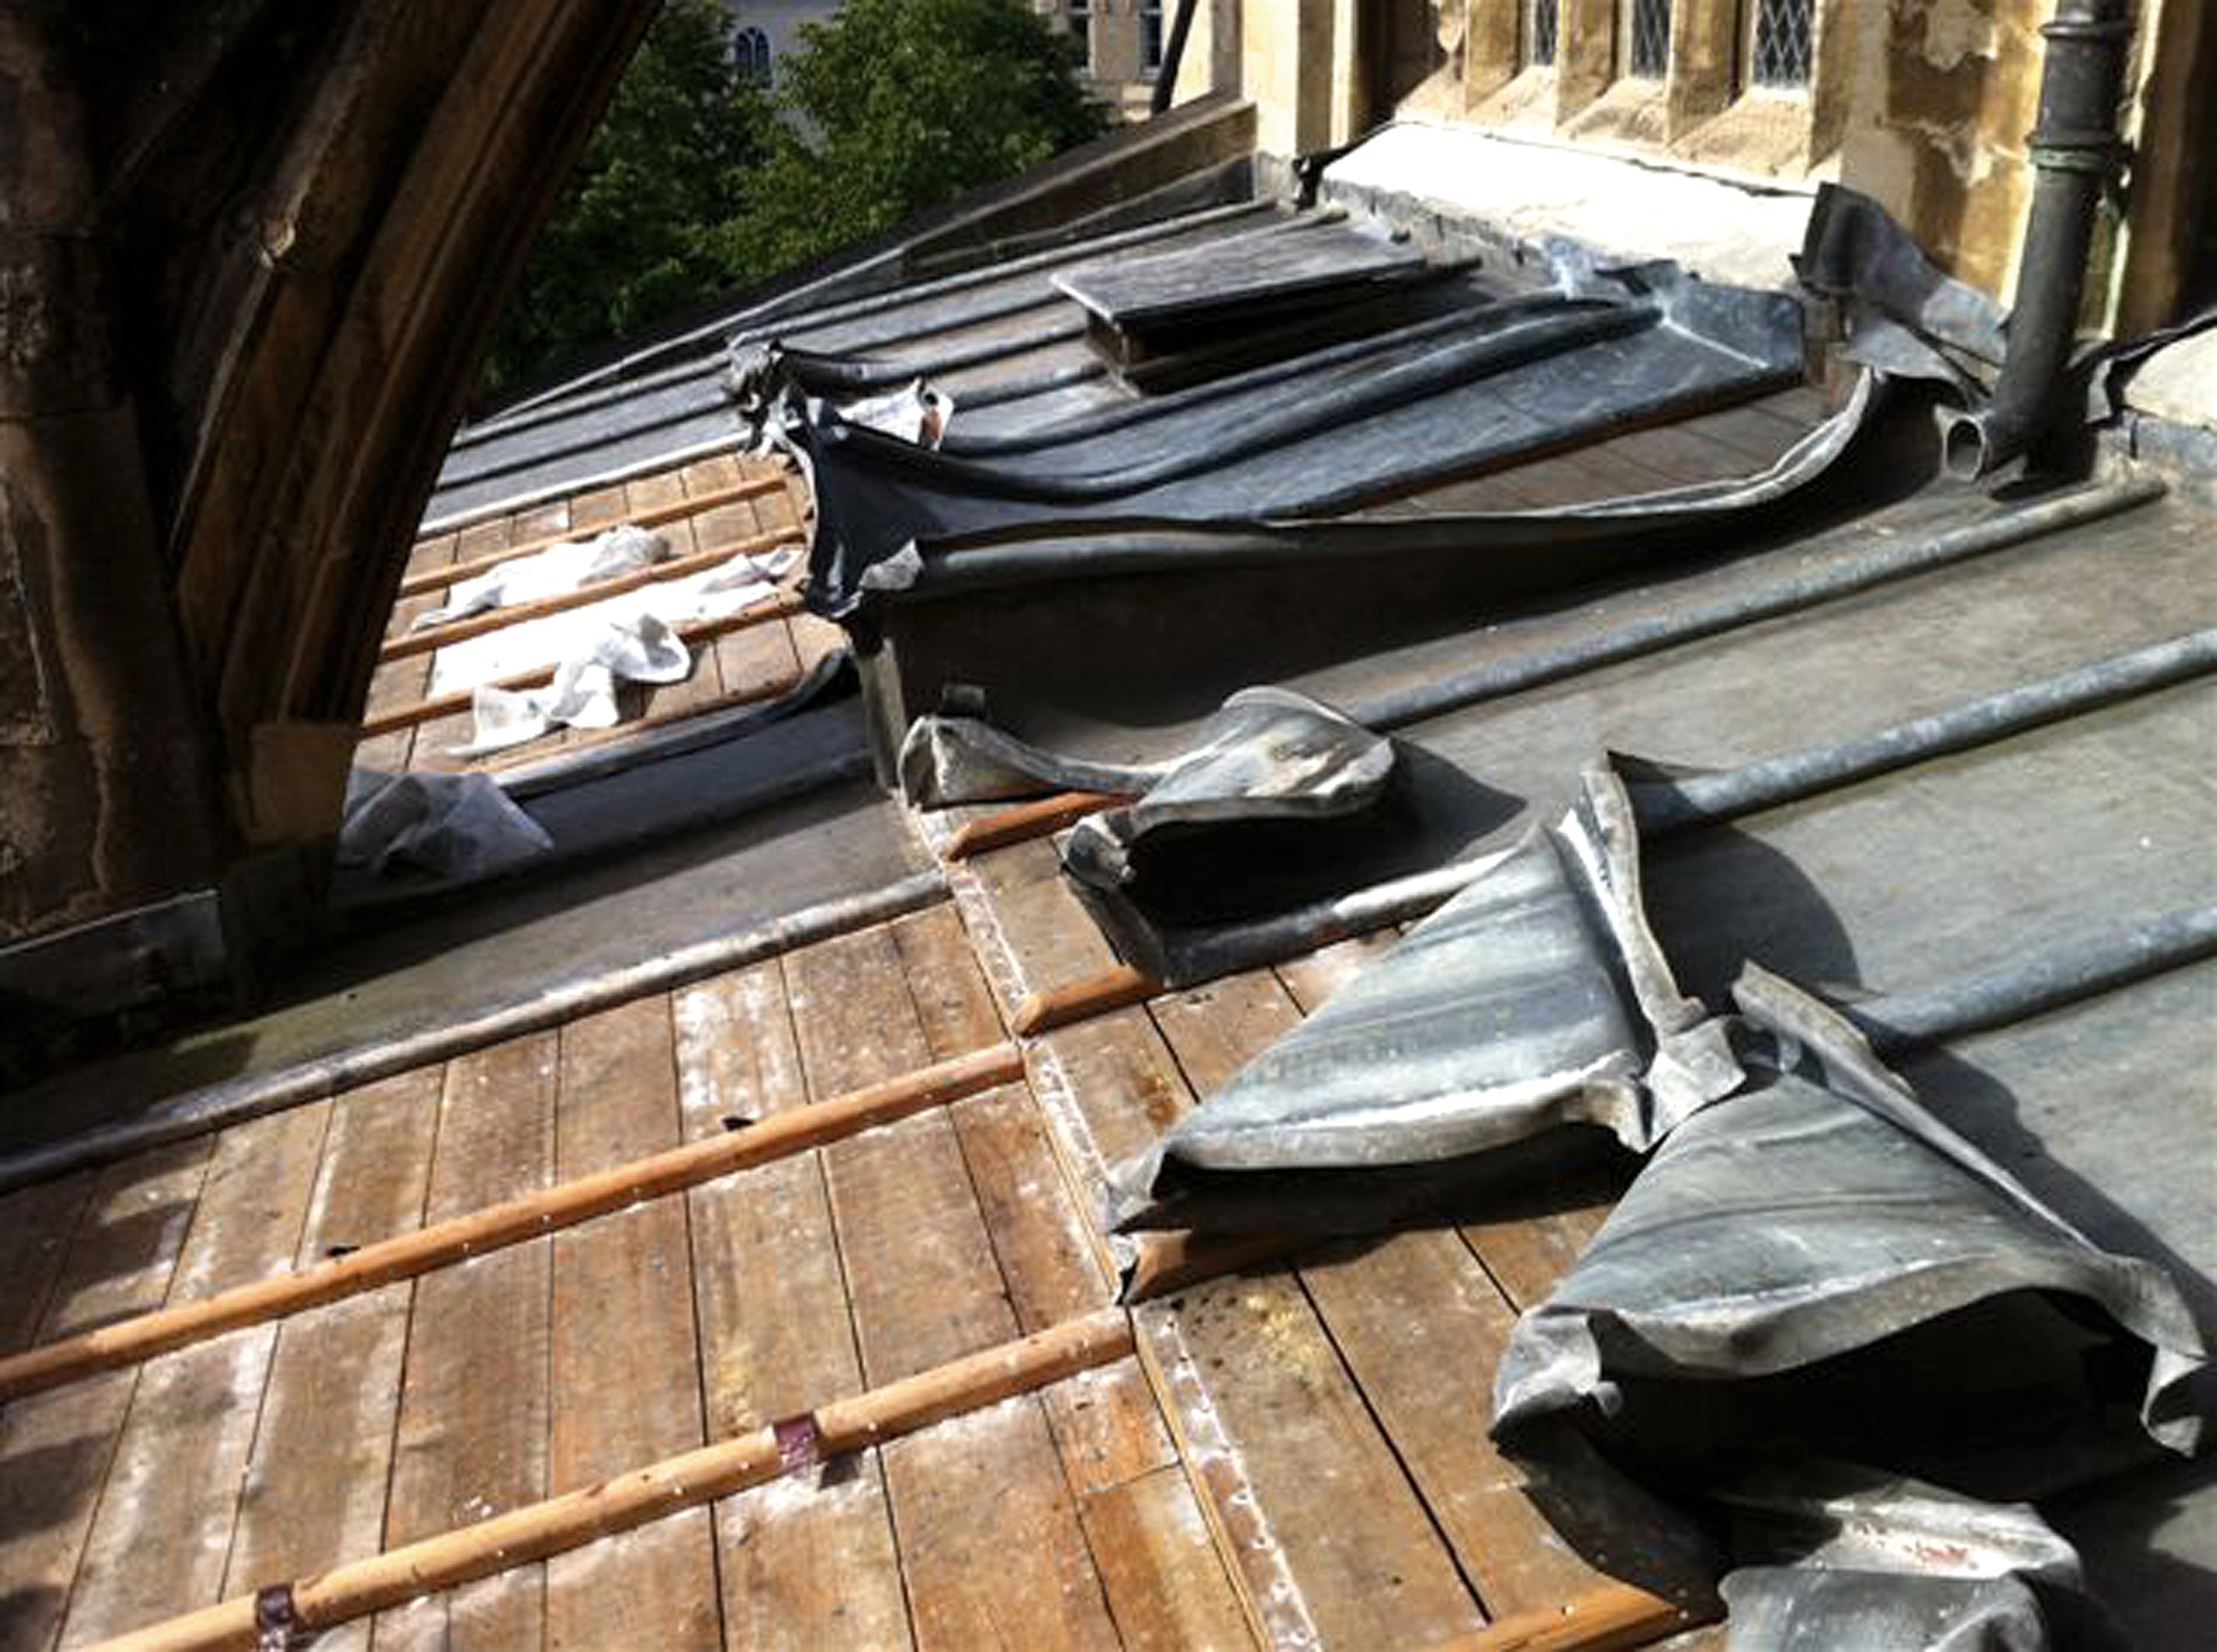 Image of the damage caused by metal theft from the roof of a historic place of worship.